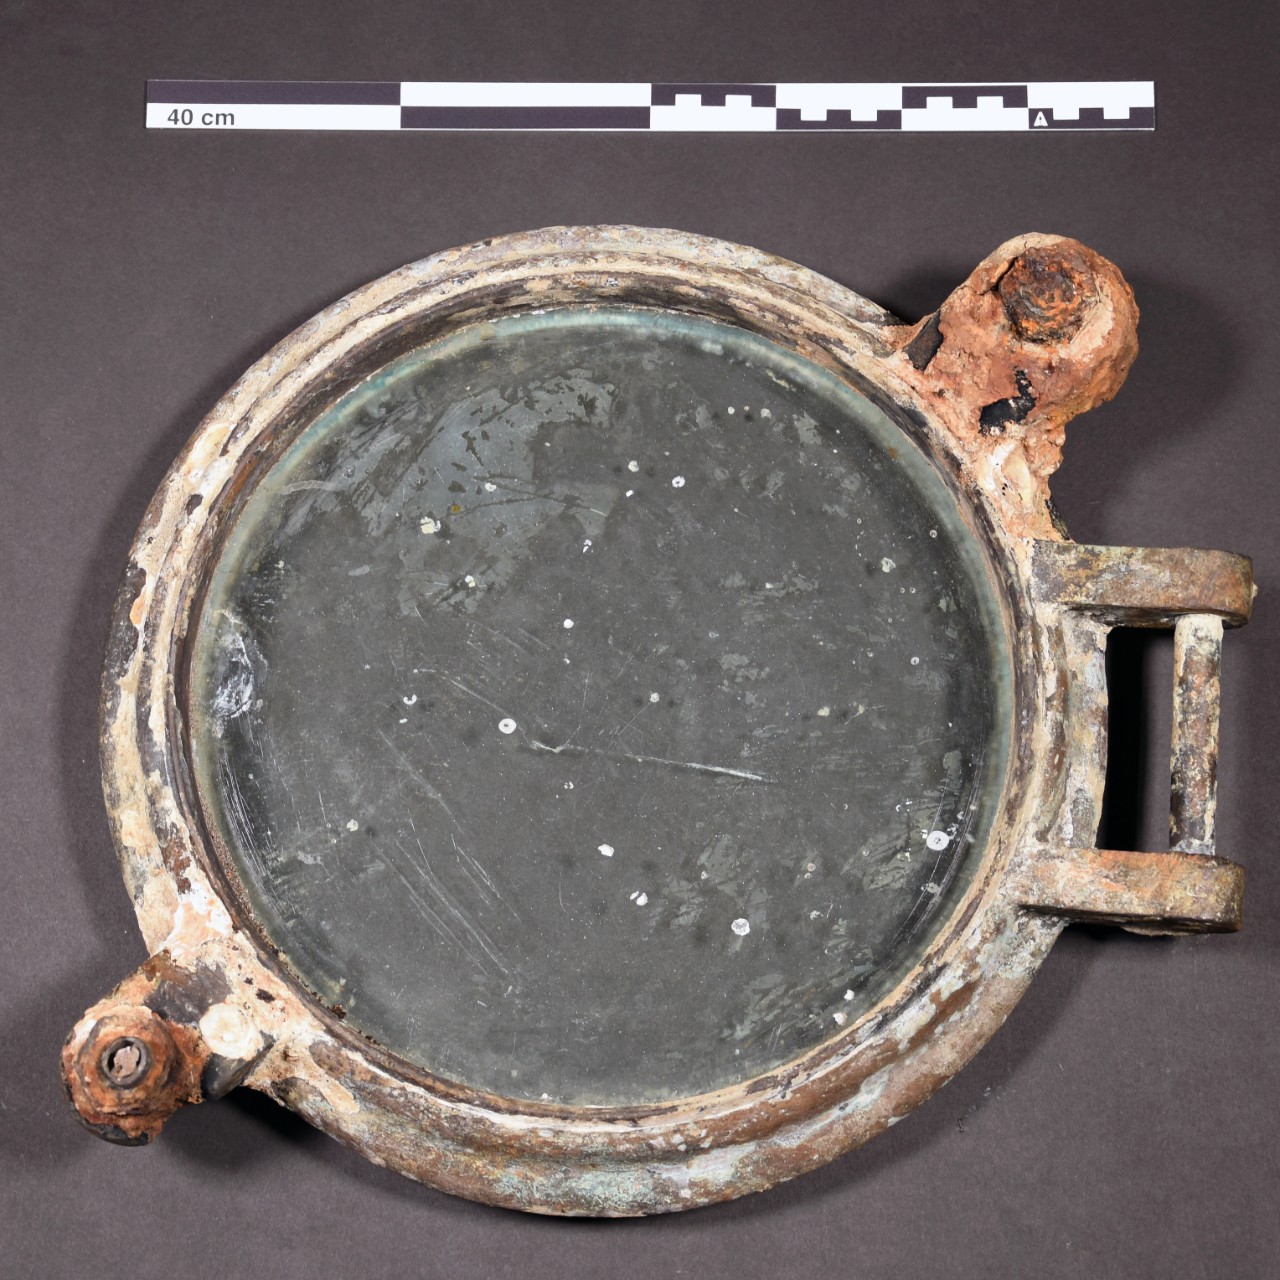 <p>Thick circular brass rim with a circular clear glass inside.&nbsp; Covering both the brass and glass are barnacles, compacted sand, red and green corrosion.</p>
